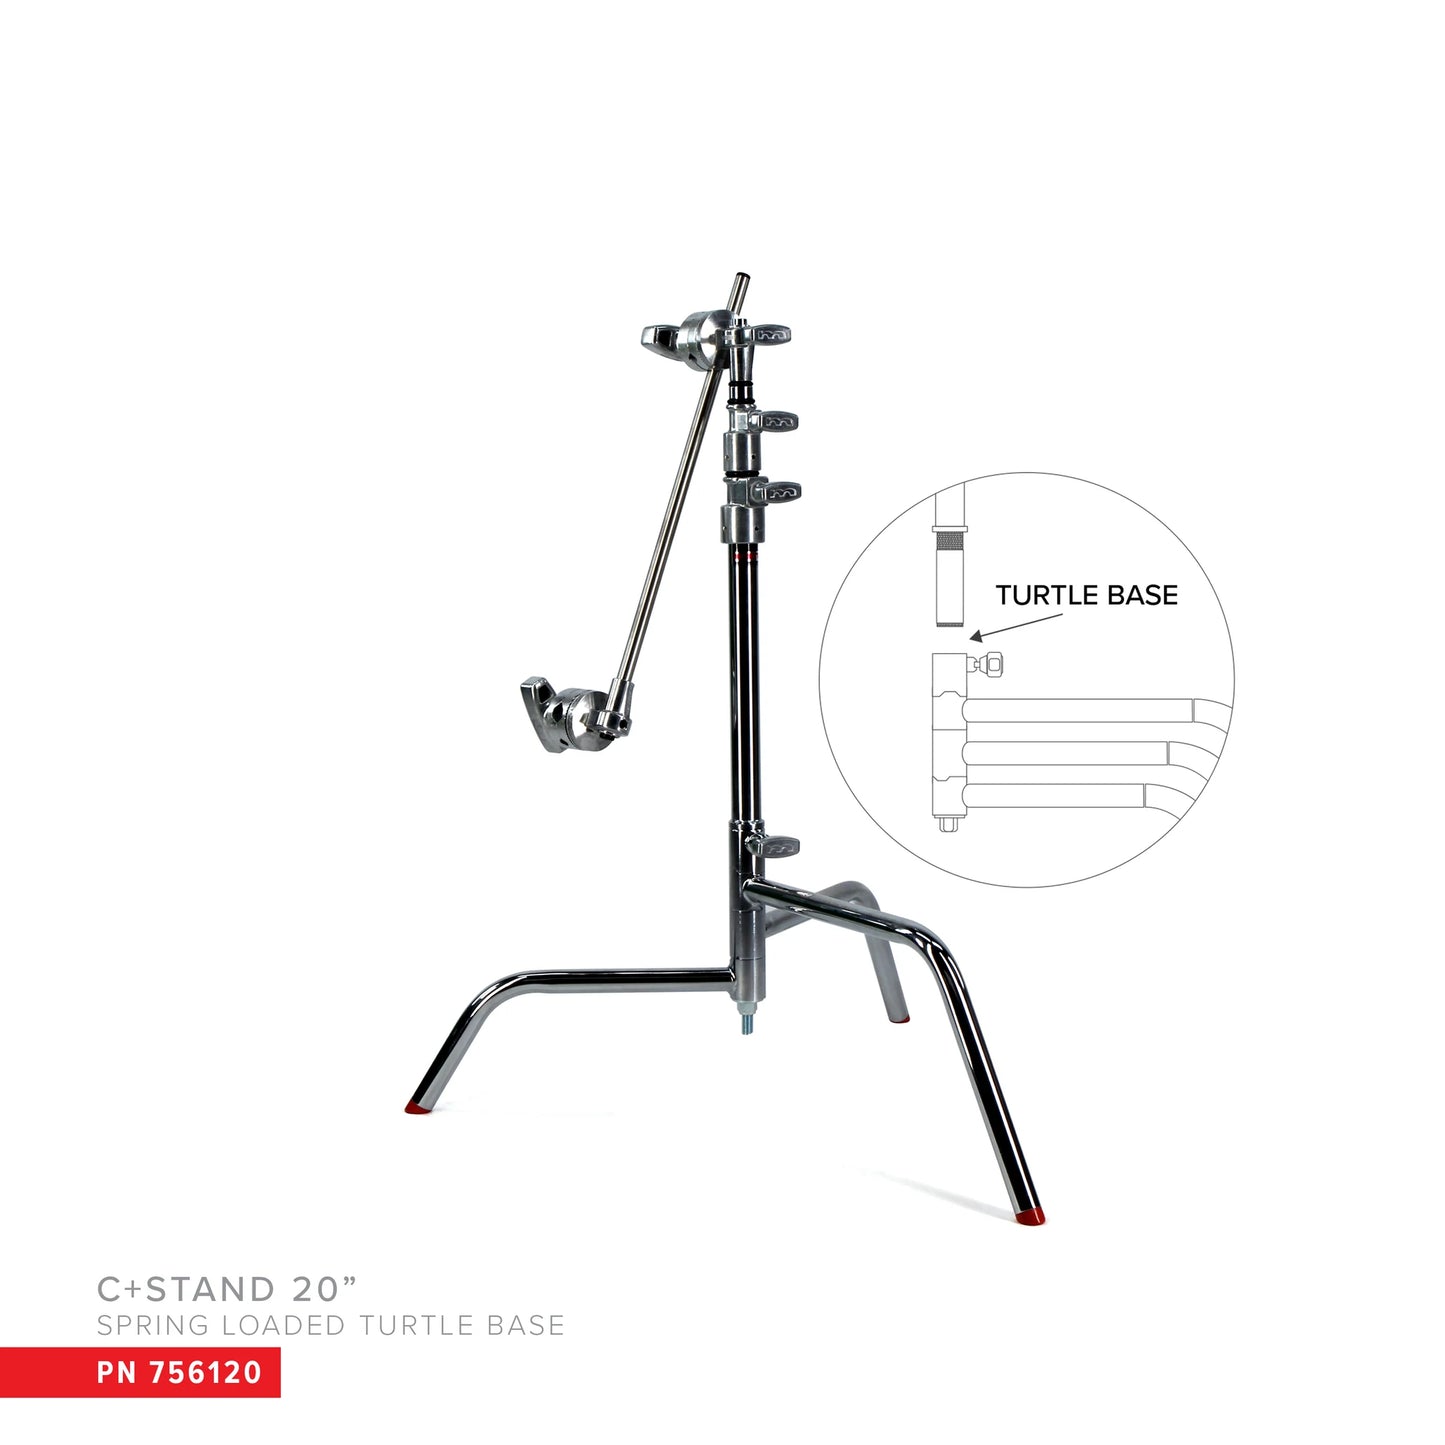 Matthews 20" C-Stand with Spring Loaded Turtle Base + Grip Arm and Head